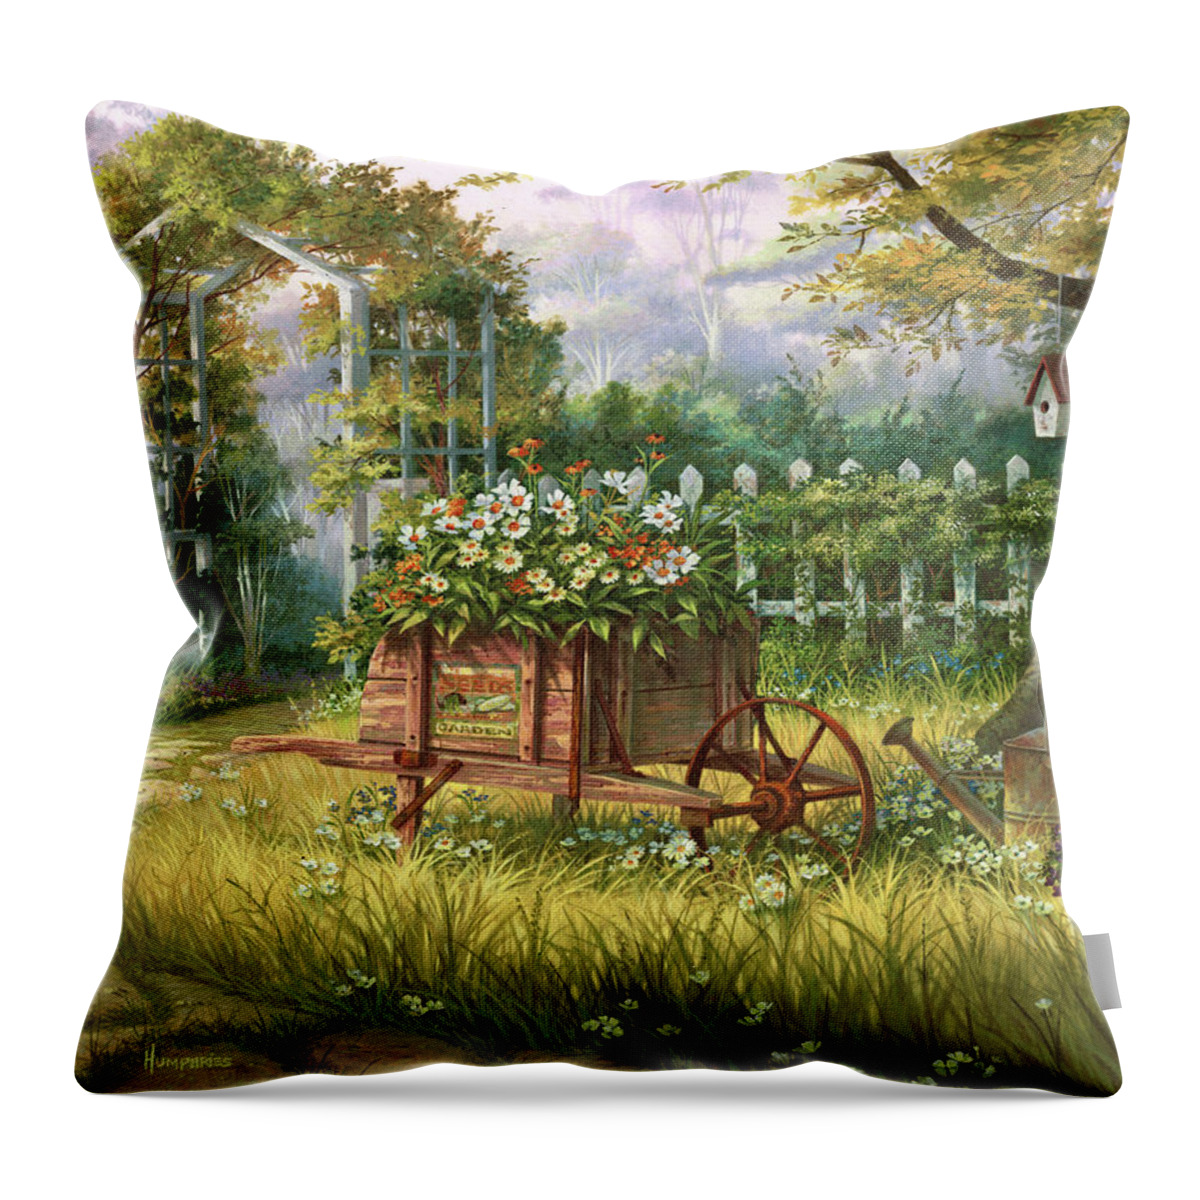 Michael Humphries Throw Pillow featuring the painting Sun Drenched by Michael Humphries